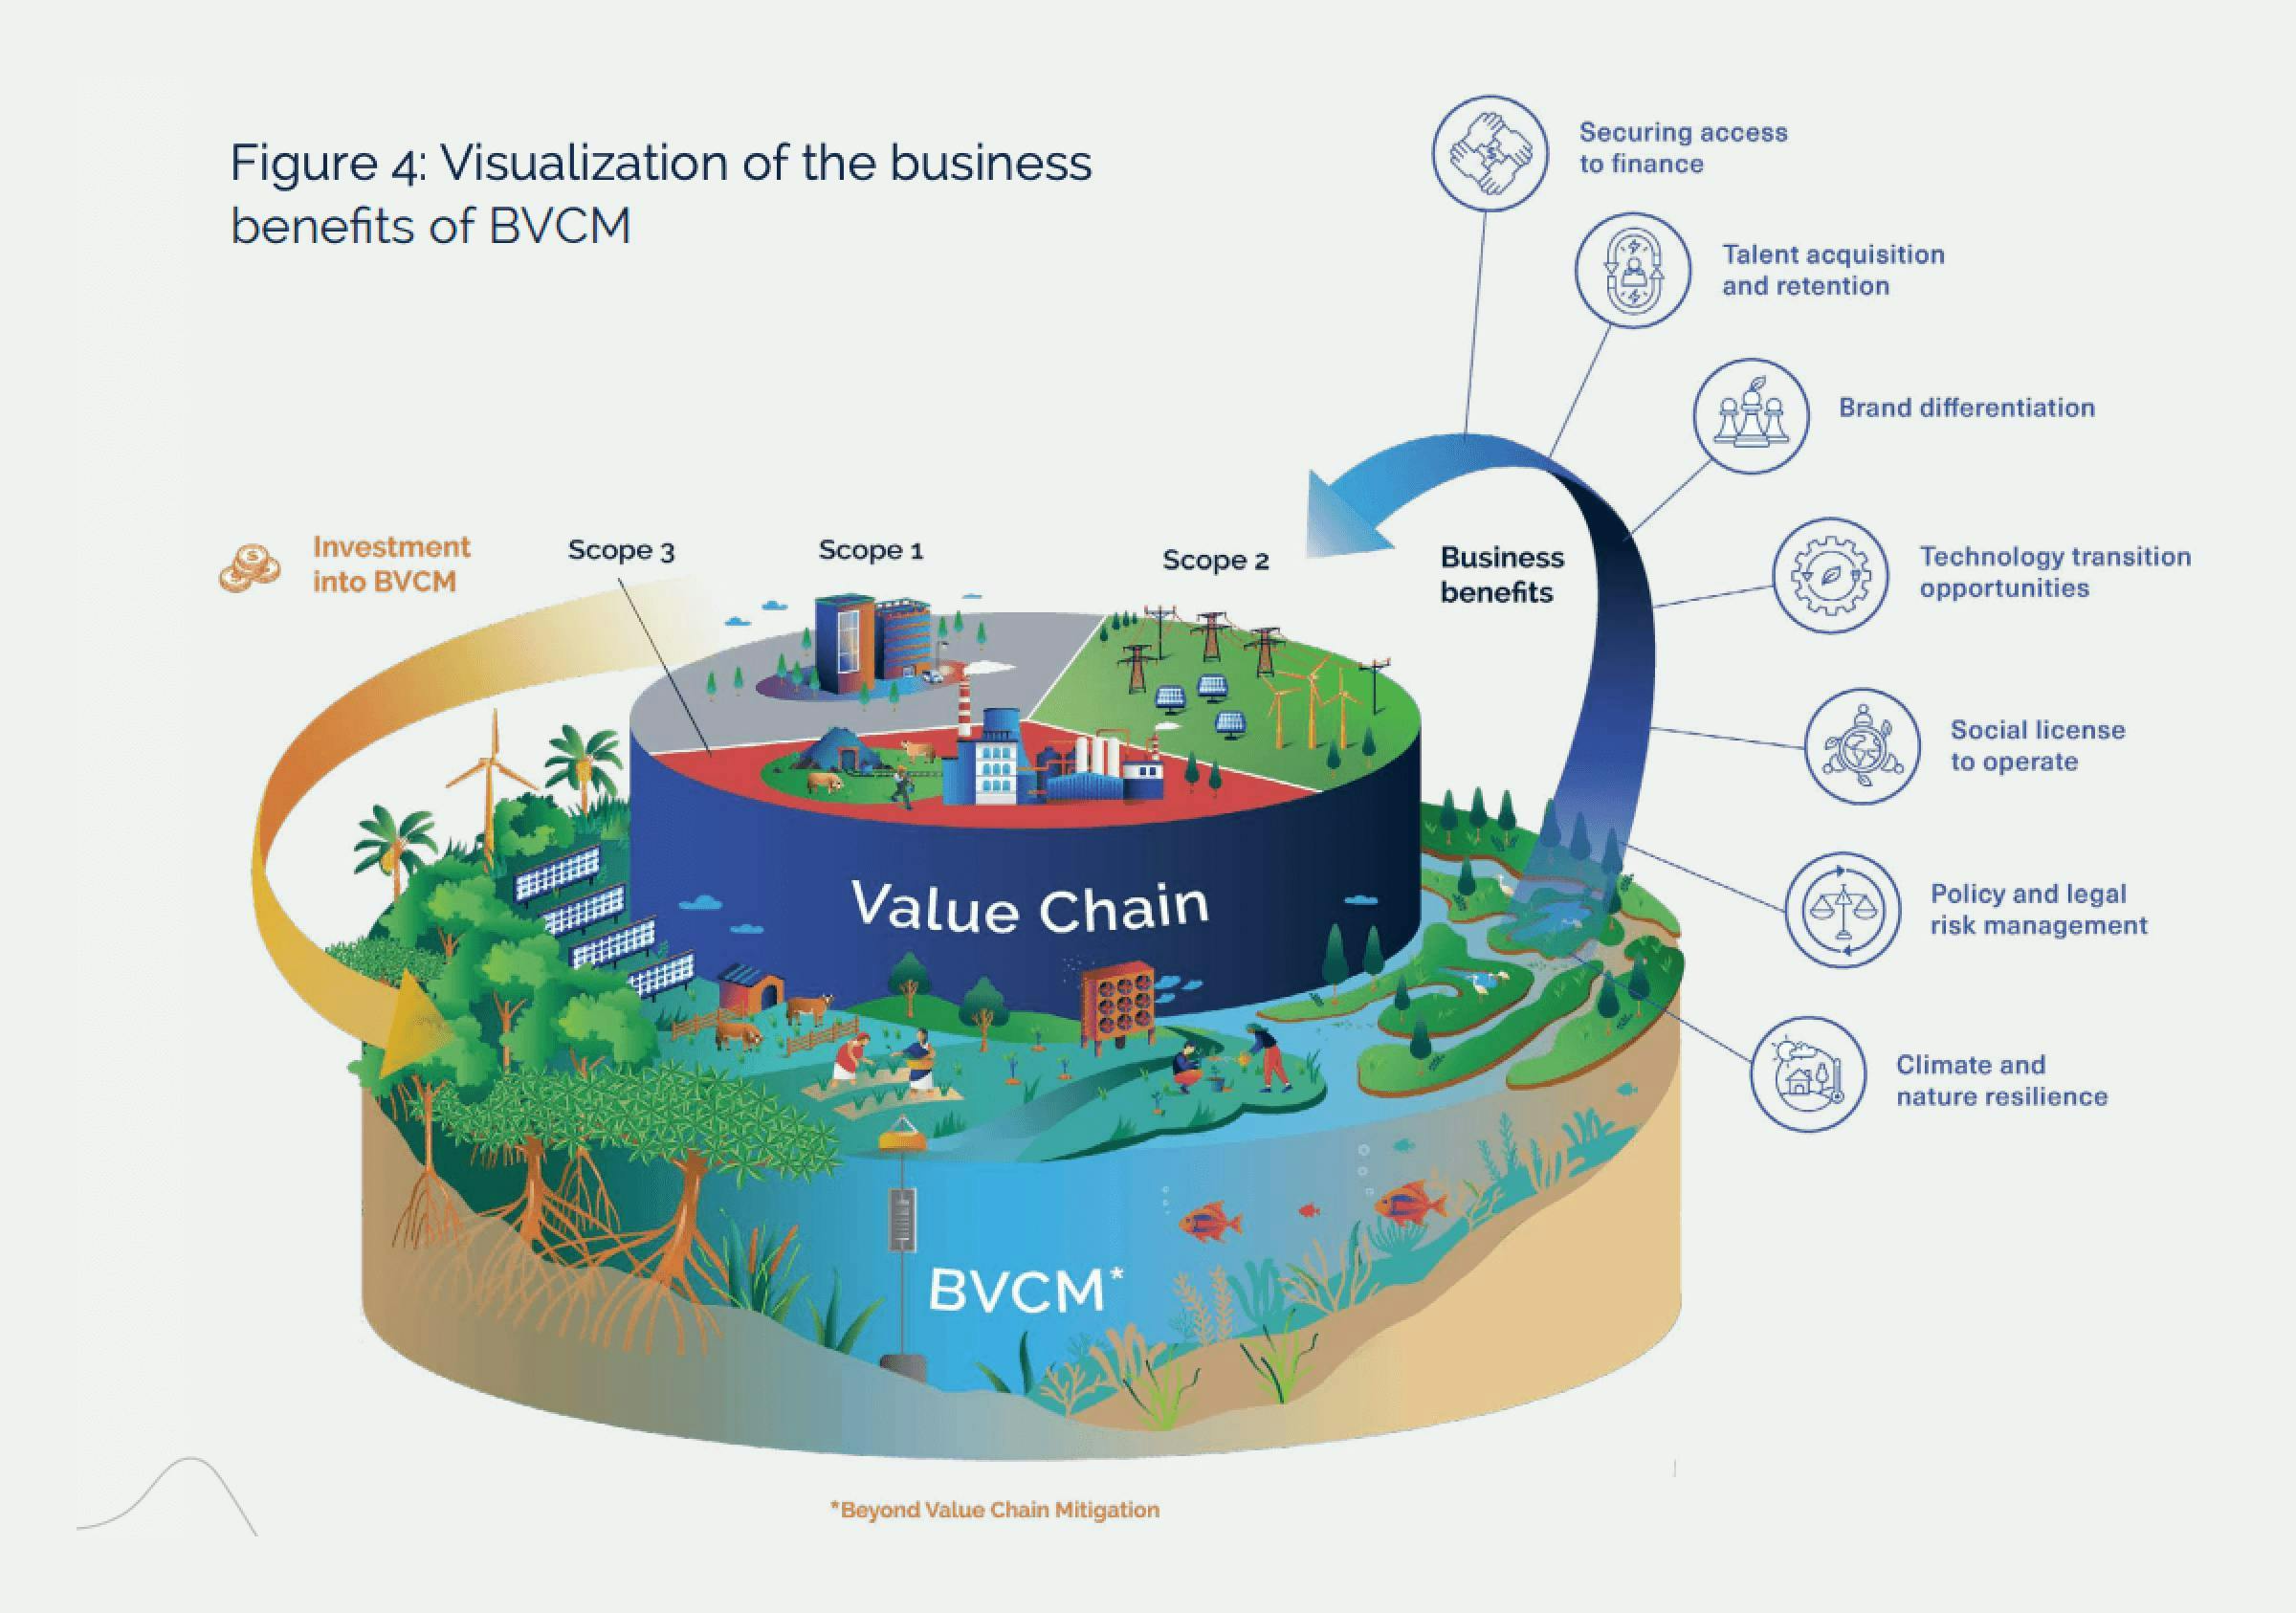 Visualisation of the business benefits to BVCM including securing access to finance and policy and legal risk management.